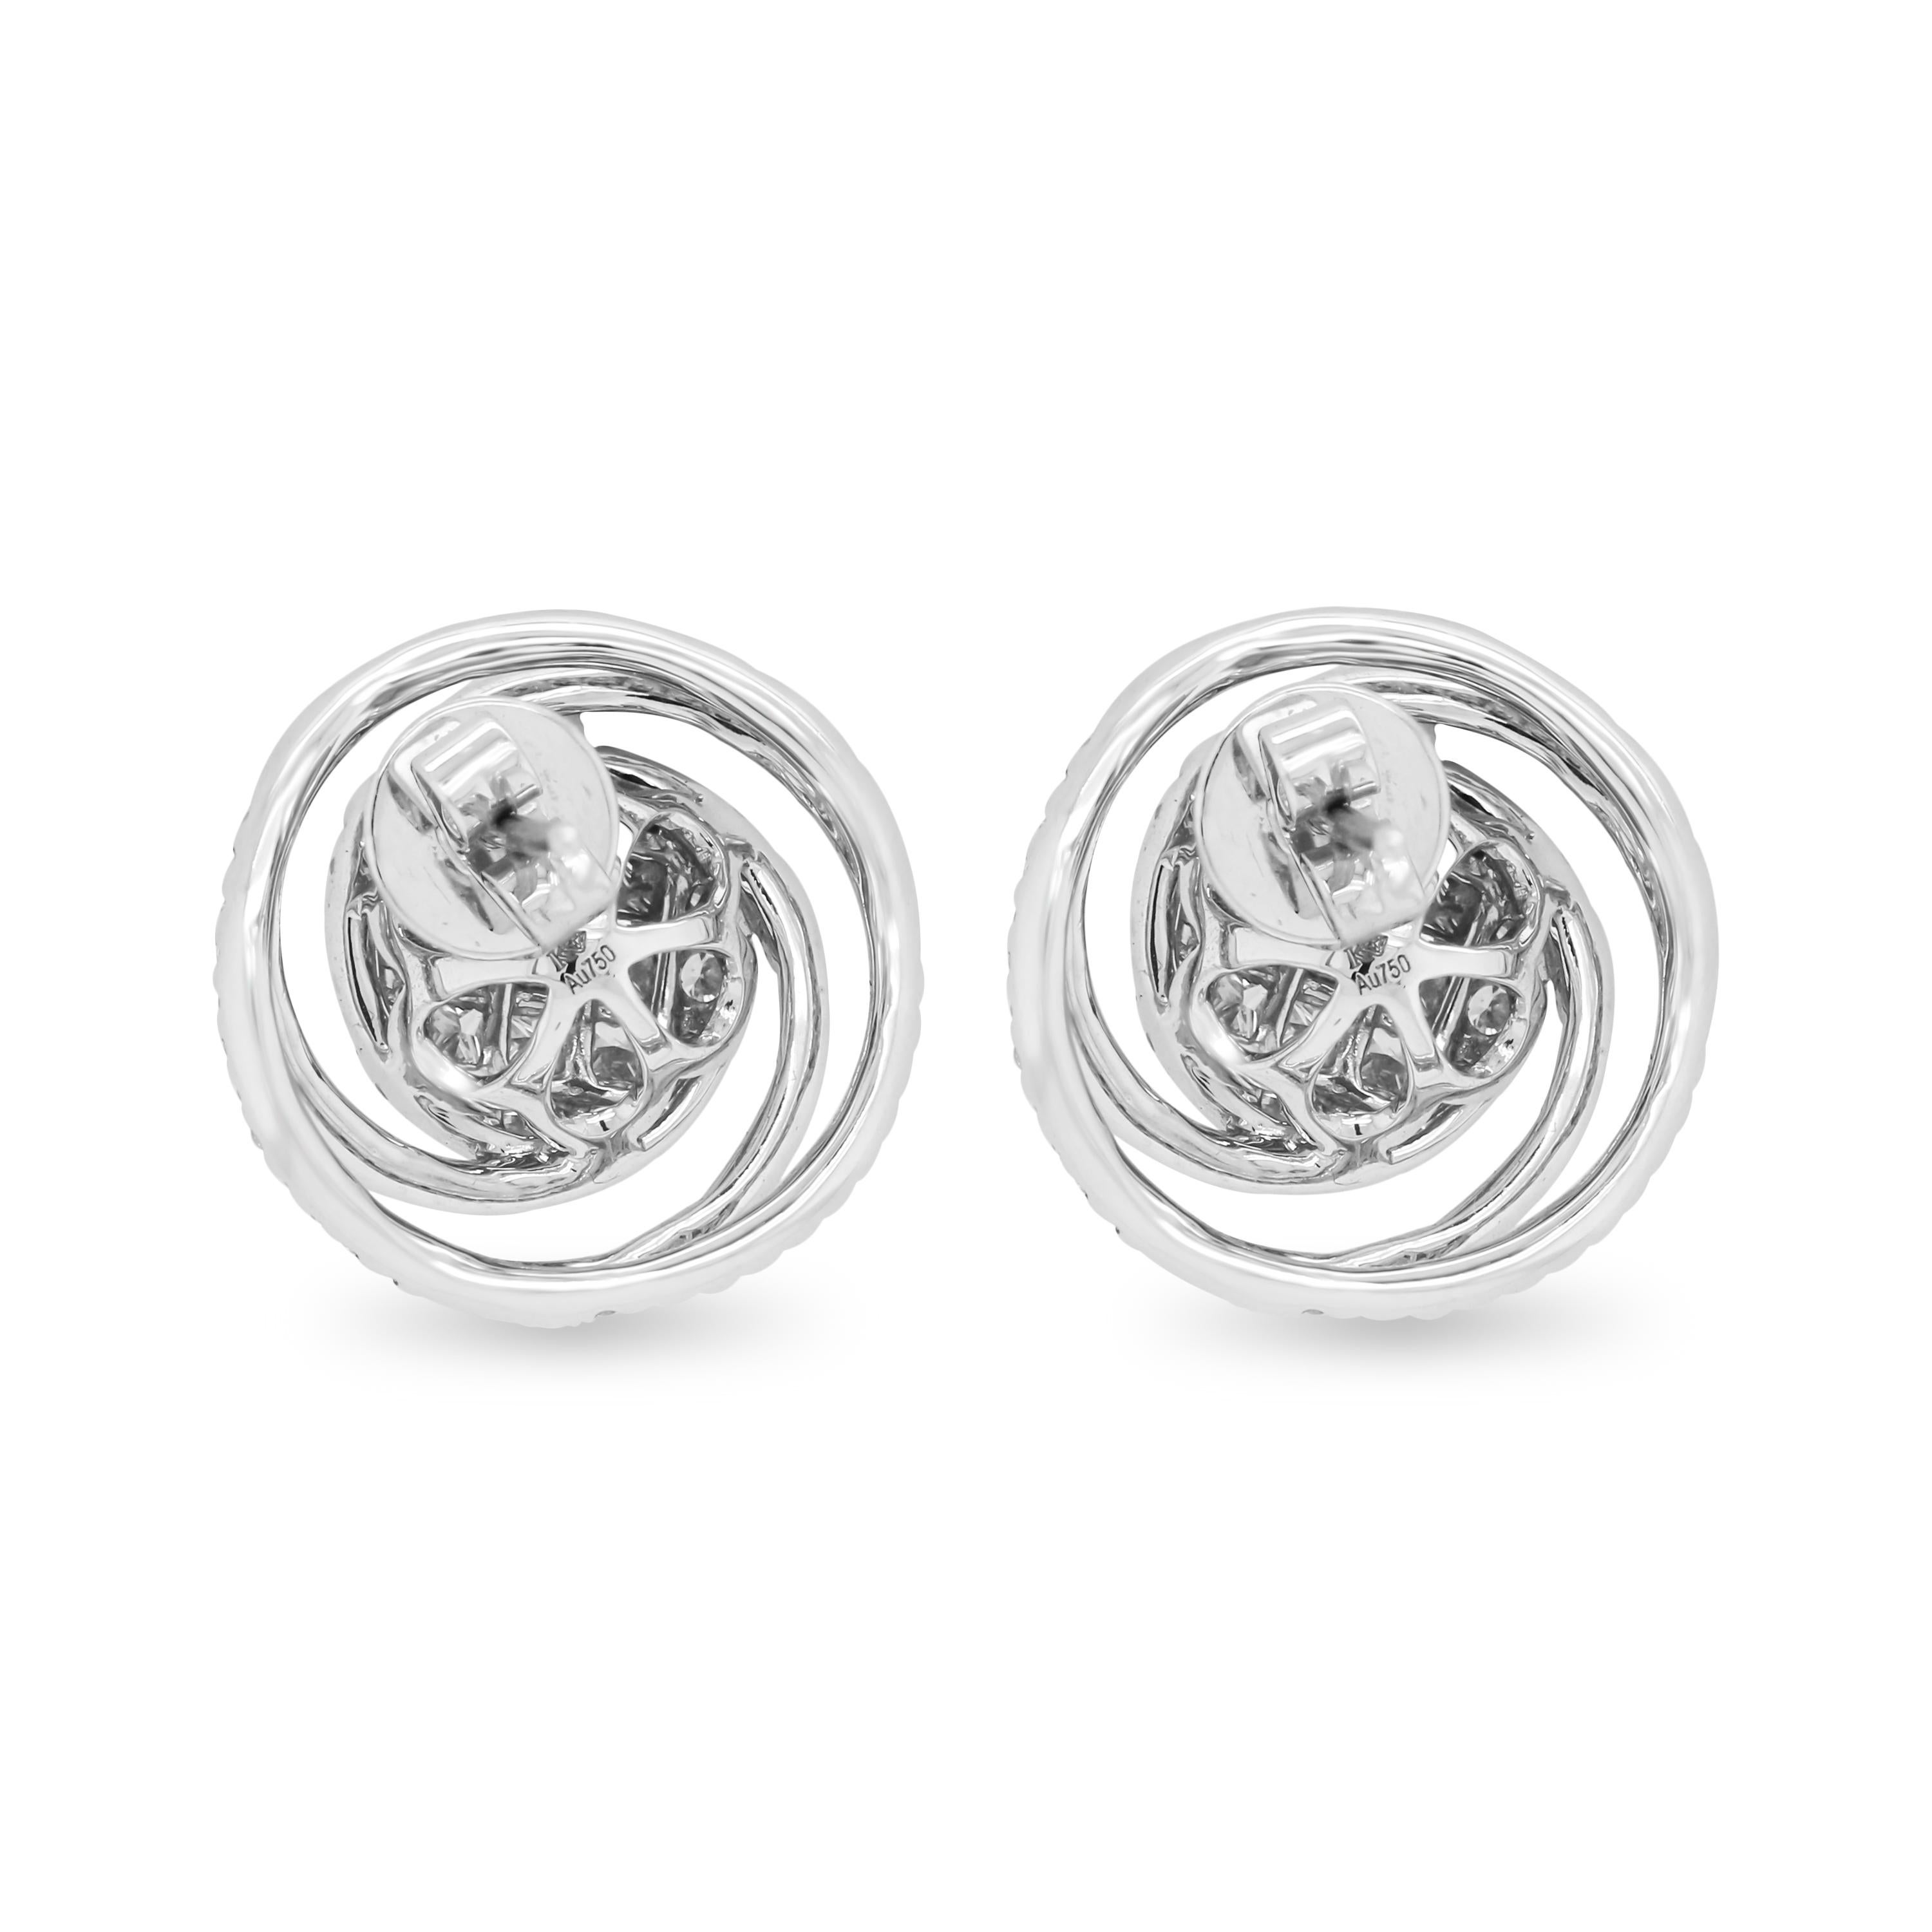 18K White Gold Circle Spiral Stud Earrings with Princess and Round Cut Diamonds

These unique earrings feature a spiral, circle design with round diamonds on the edges and princess-cut diamonds in the center

2.79 carat G color, VS clarity diamonds